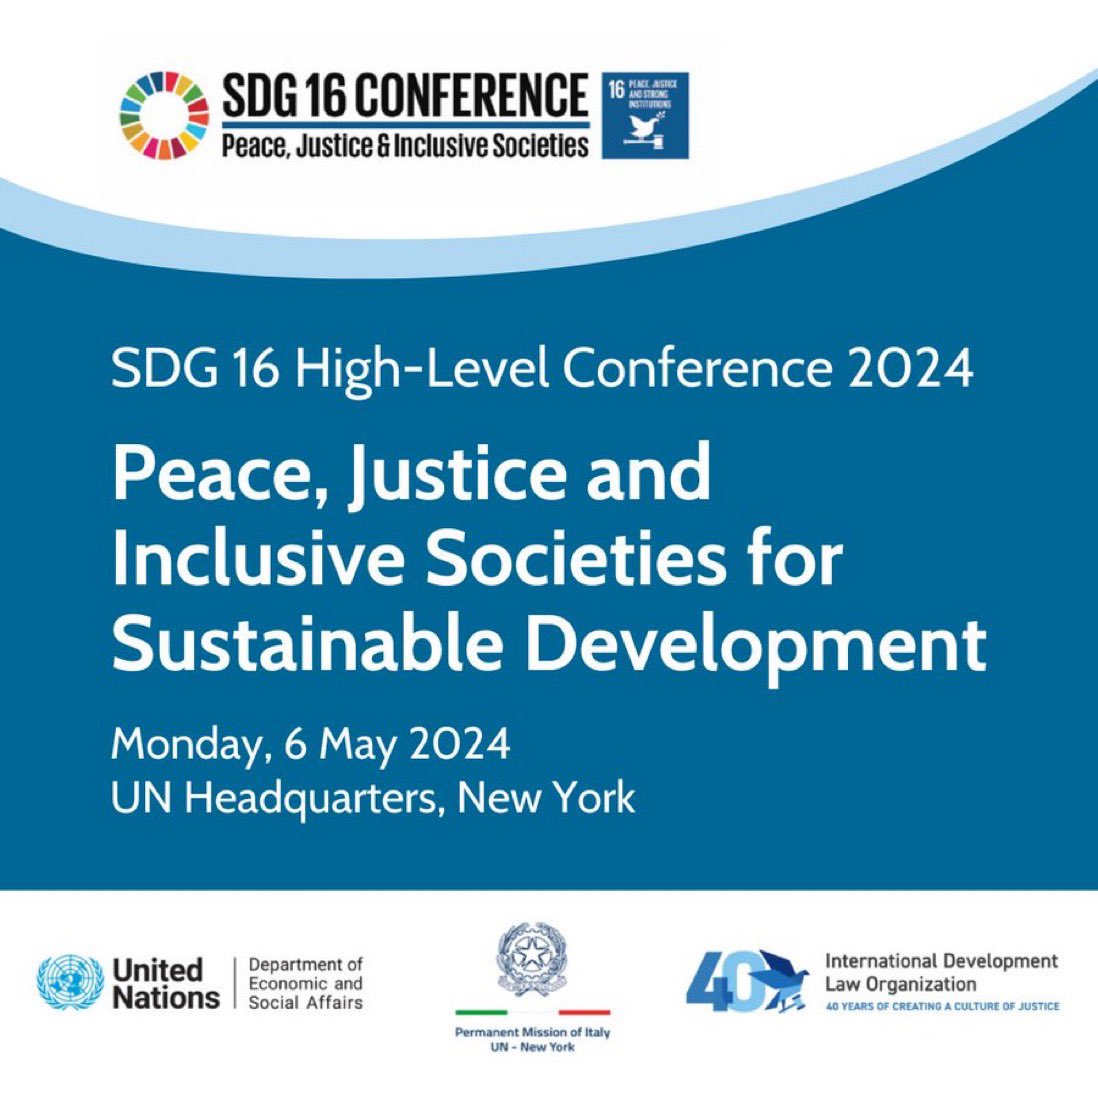 Happening tomorrow ⤵️ We will launch the 2024 Rome #CivilSociety Declaration on #SDG16+ in context of the conference programme. Stay tuned for further updates! 🌎